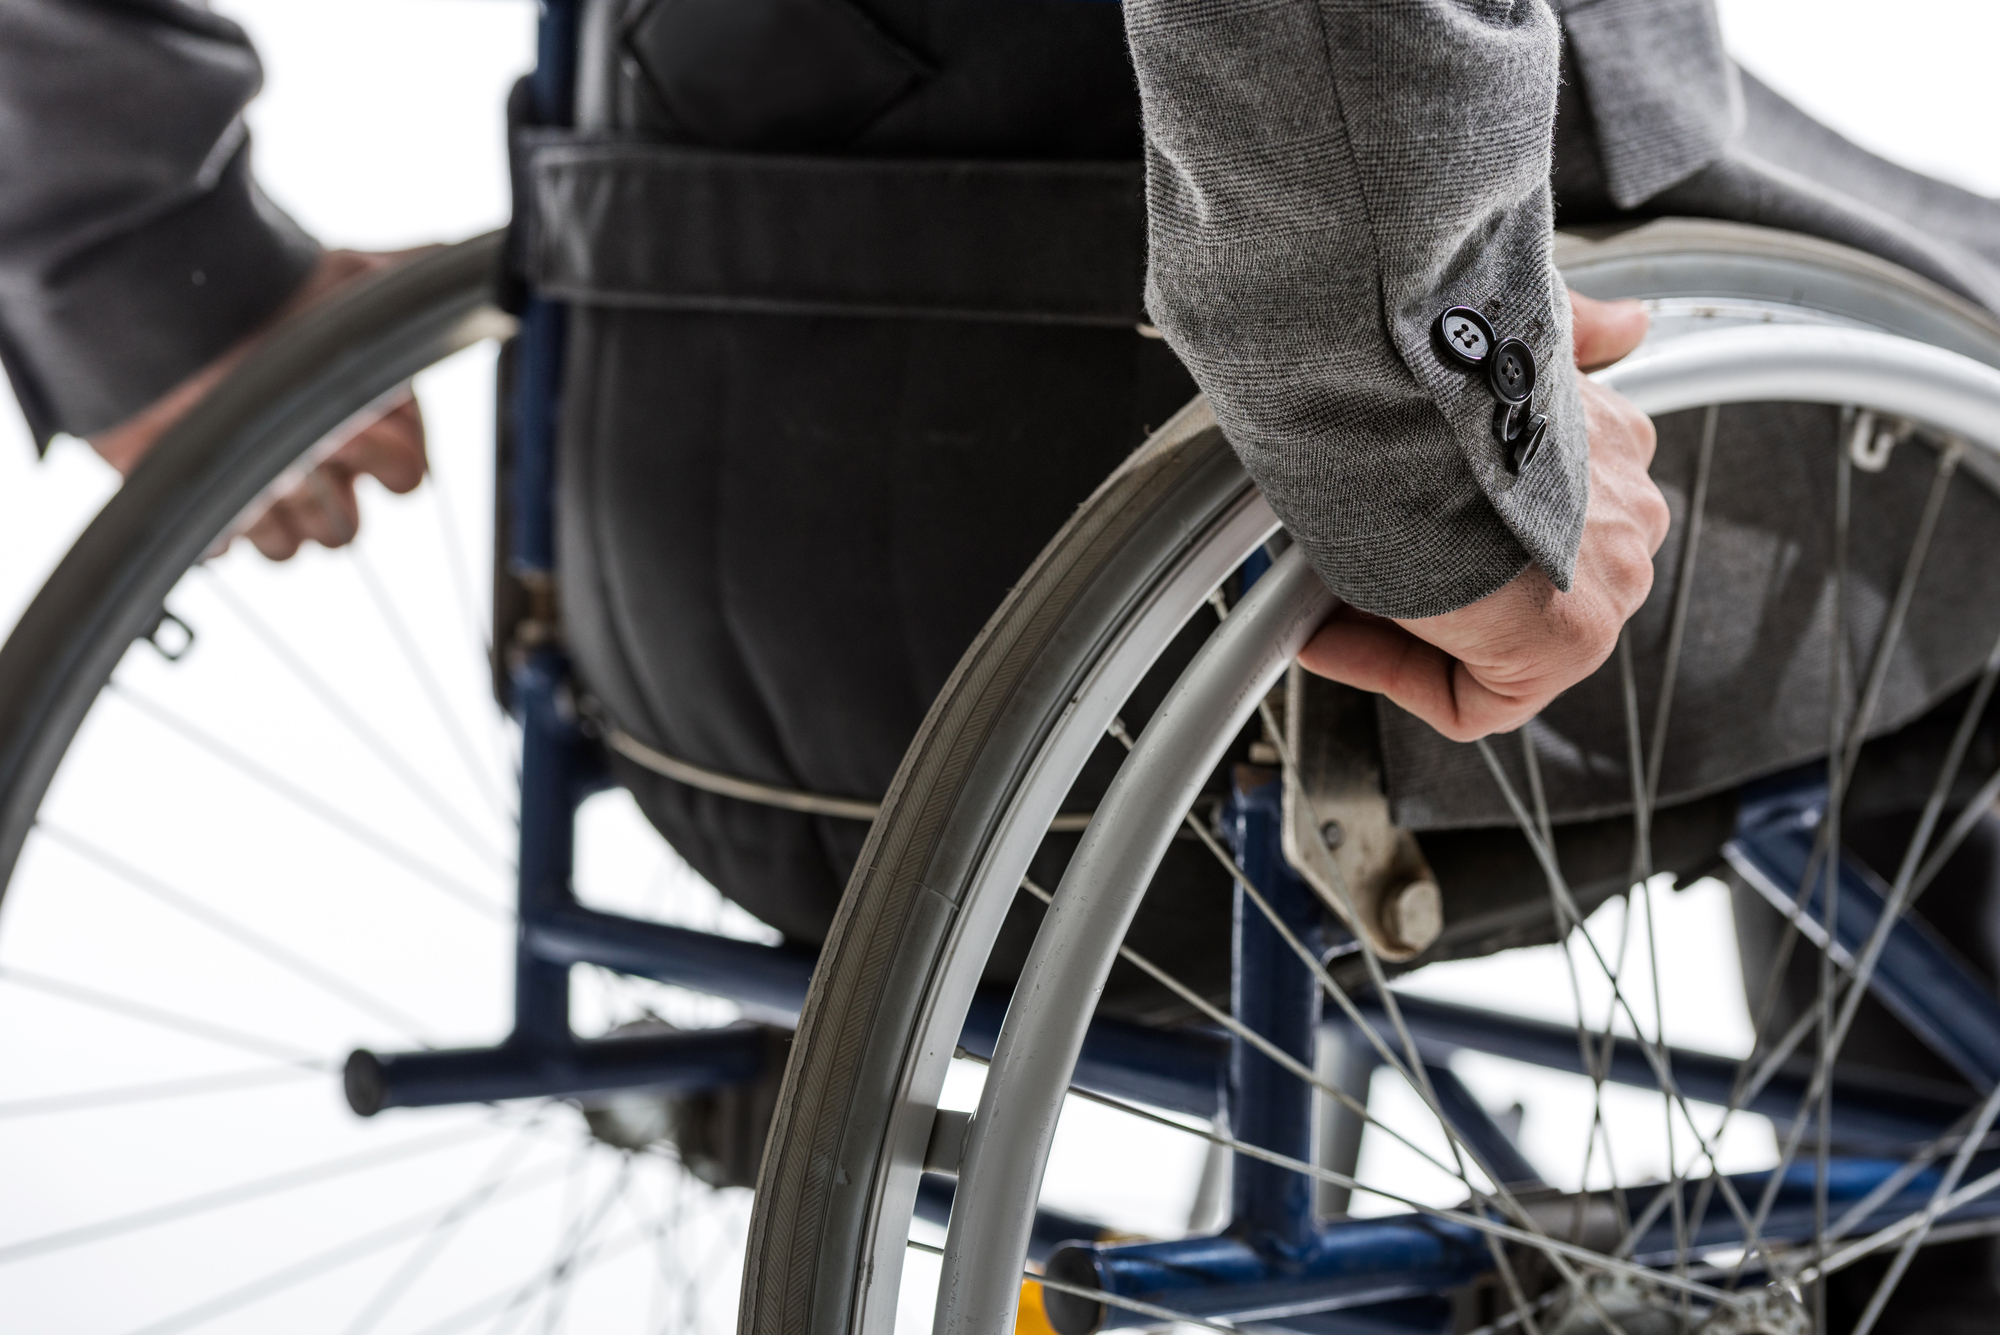 Disability and independence: 8 tips for more enjoyable days